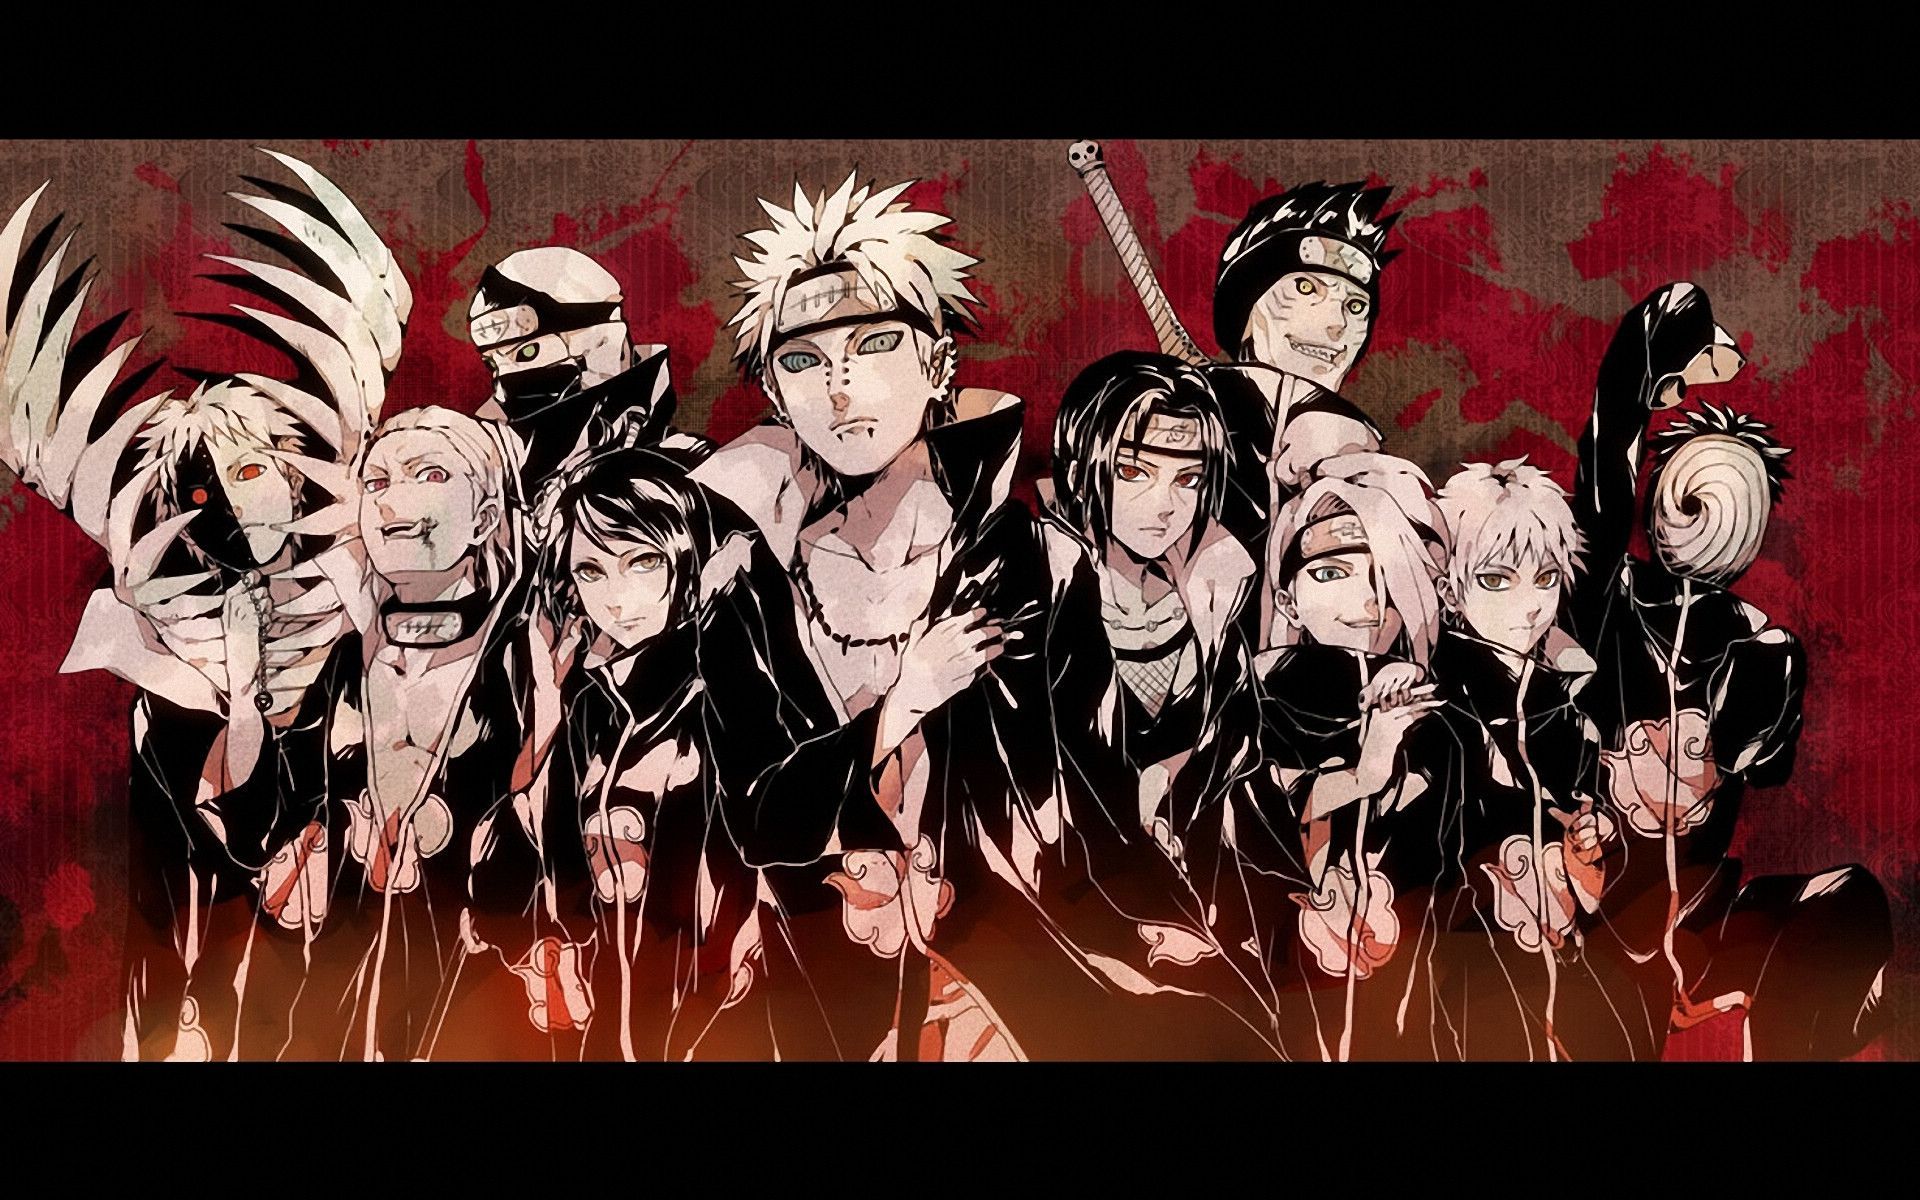 Naruto desktop wallpapers in HD quality - ready for your screen